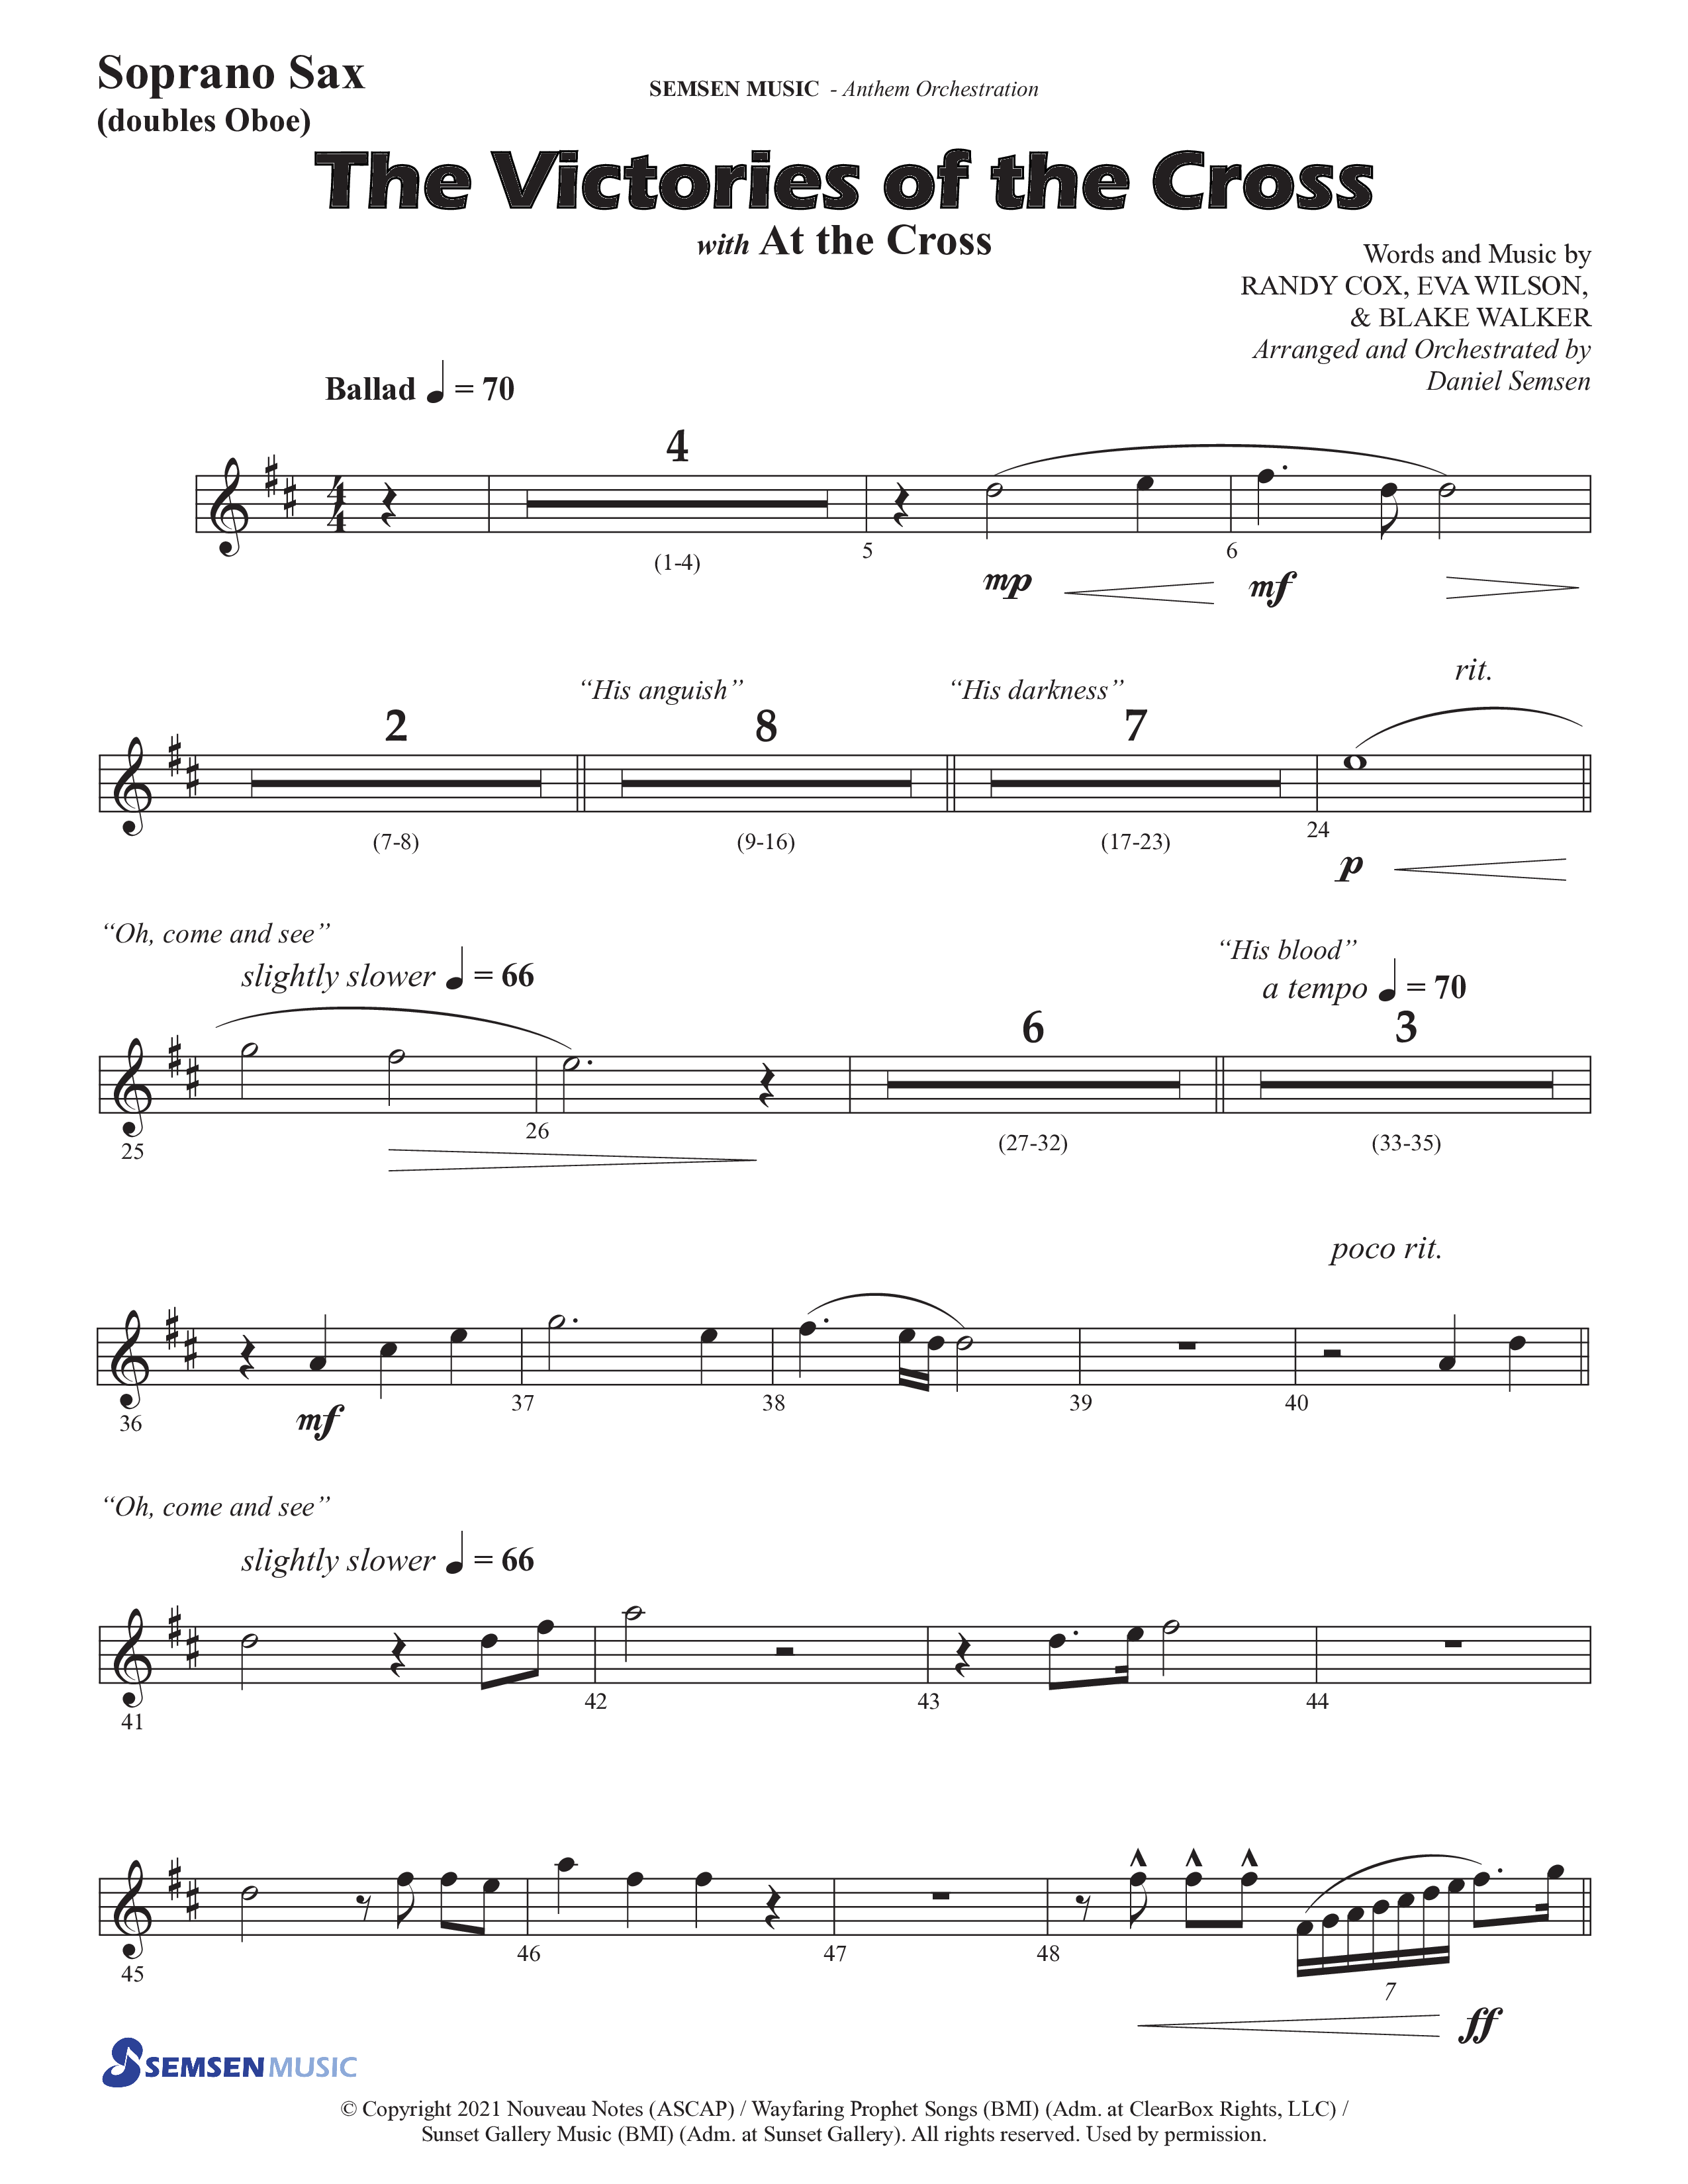 The Victories Of The Cross (with At The Cross) (Choral Anthem SATB) Soprano Sax (Semsen Music / Arr. Daniel Semsen)